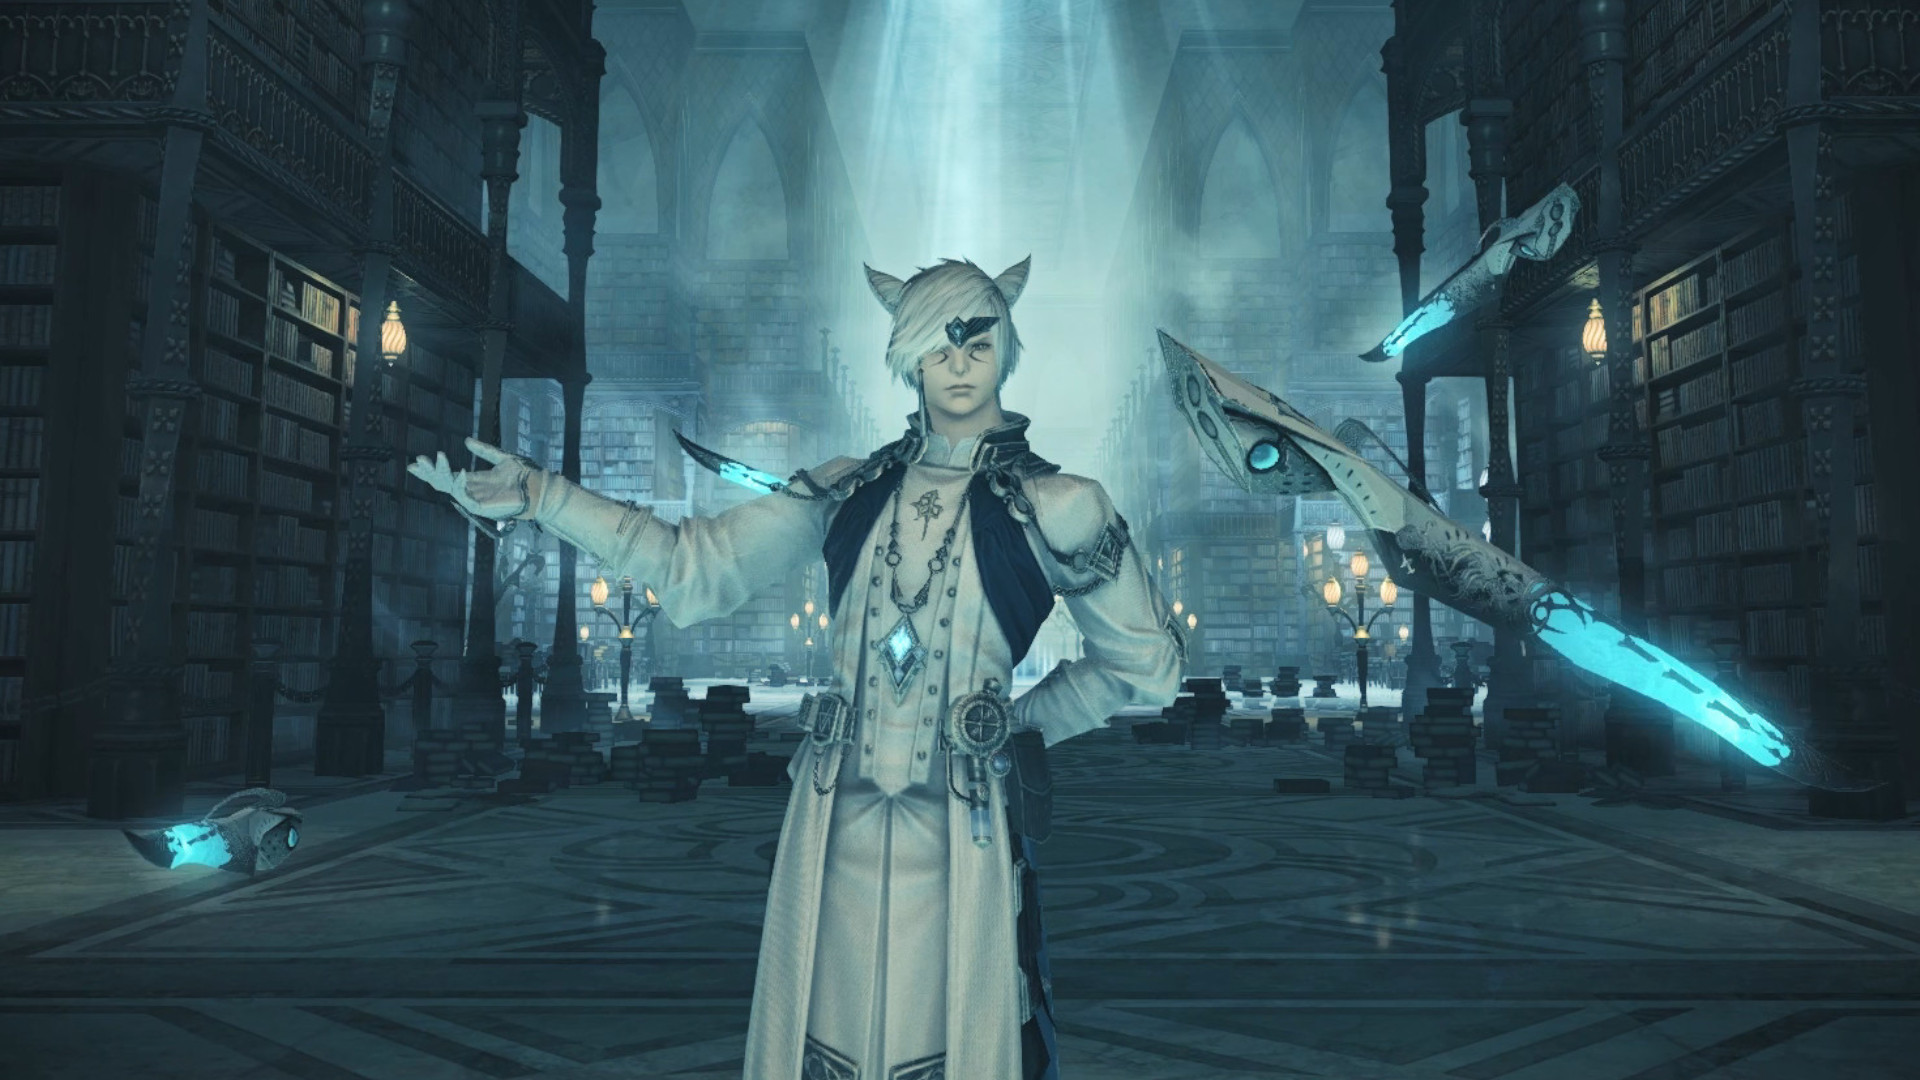 You won't get banned for FFXIV ERP – as long as it's private and consenting